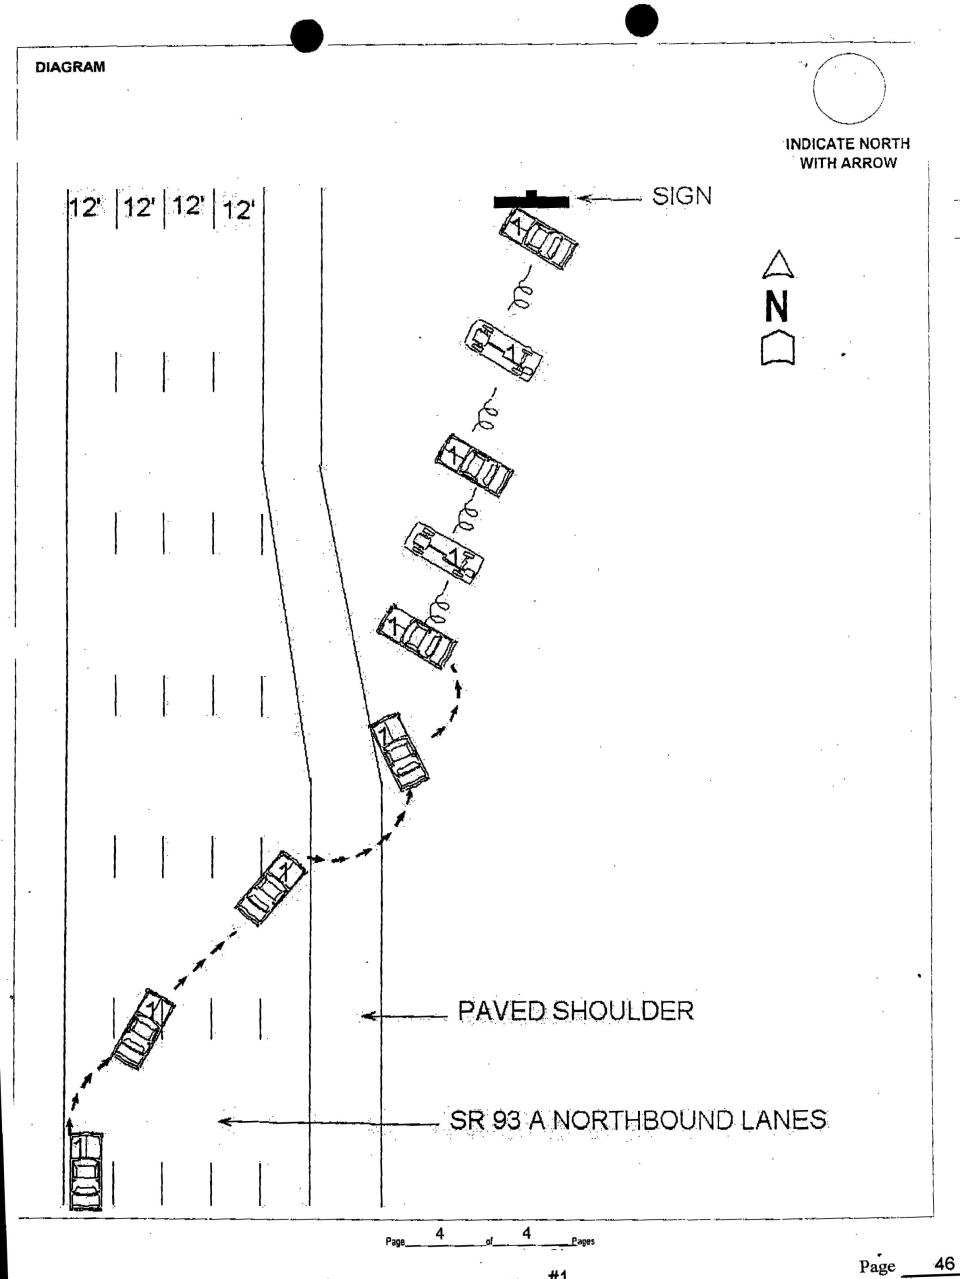 A diagram from a FHP report detailing a fatal rollover crash near the Sunshine Skyway on Sunday afternoon, Feb. 5, 2006. Jabe Carney is serving a 25 year sentence for DUI manslaughter and related charges for a crash that killed his friend Jason Gibson